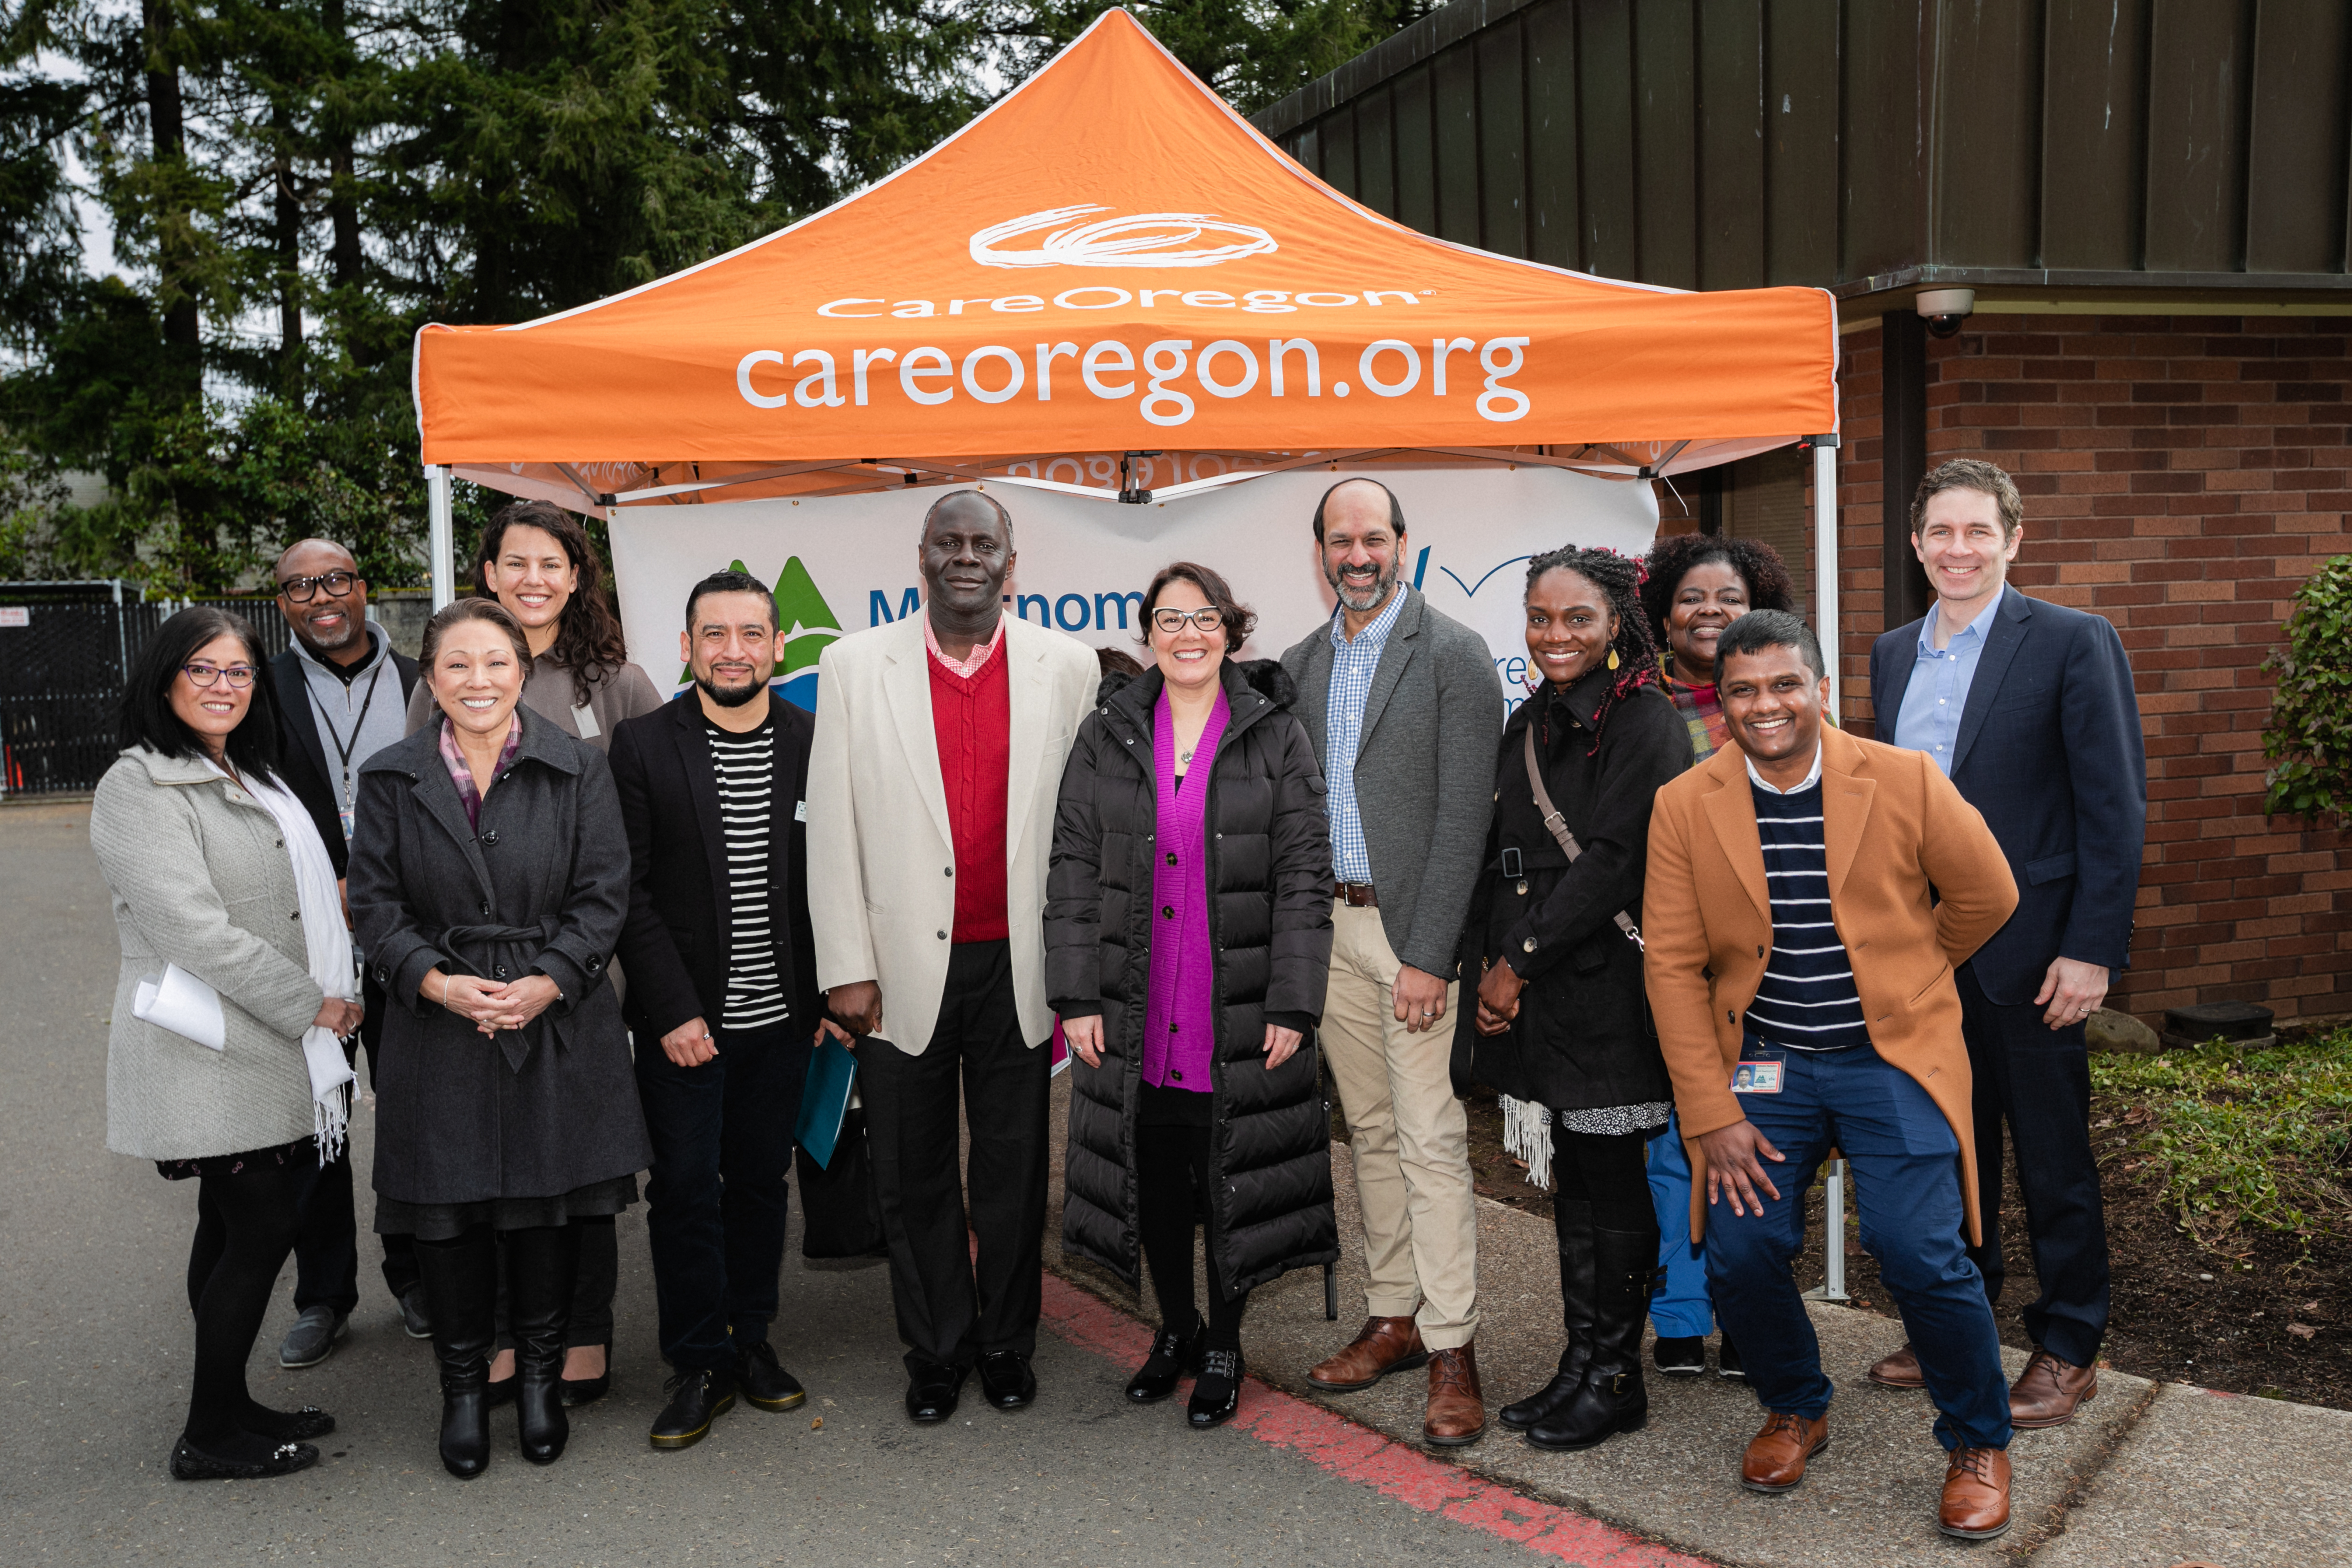 A group of people standing in front of a CareOregon tent.